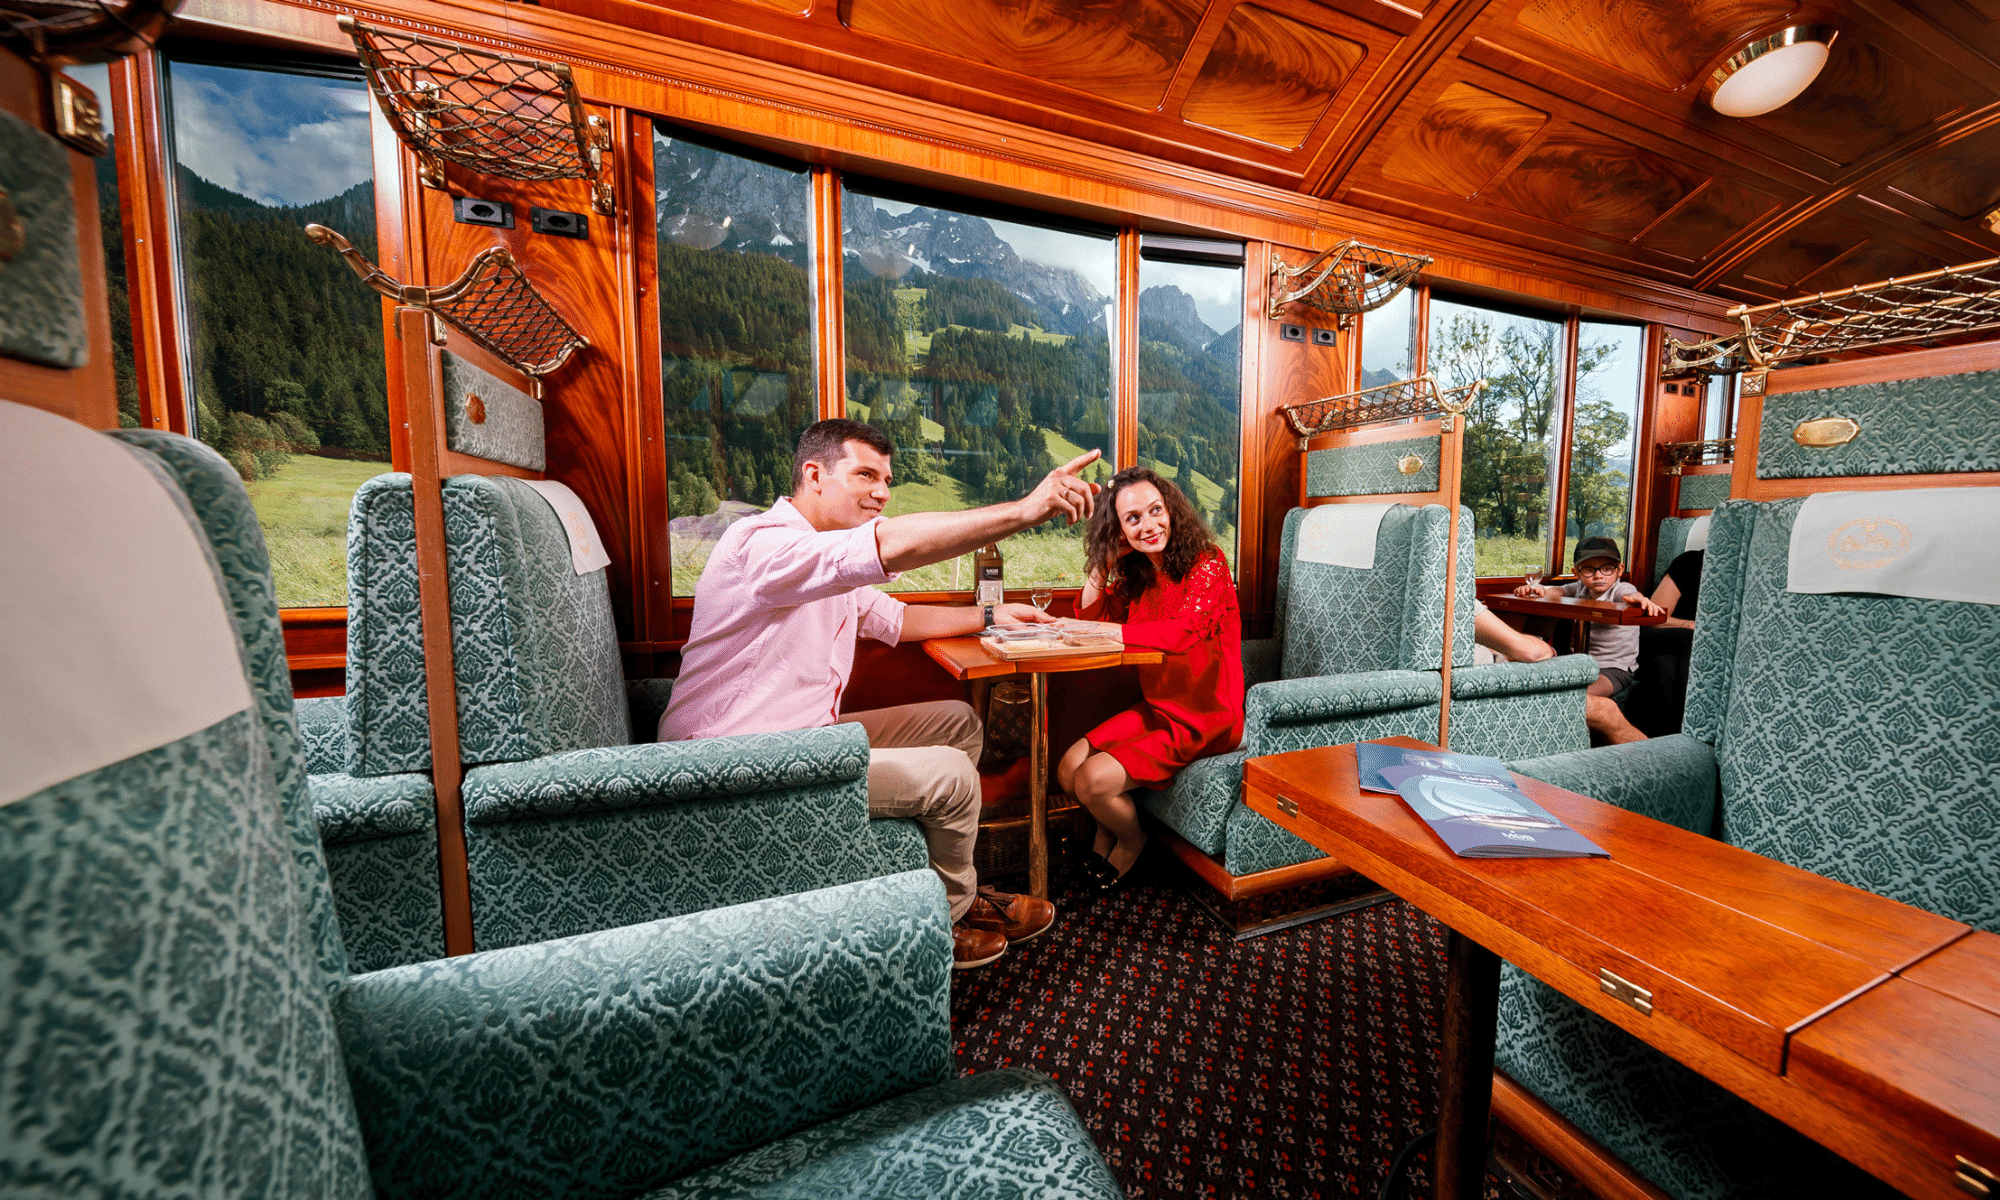 Goldenpass Belle Epoque train carriages with couple - Rougemont - Summer - MOB